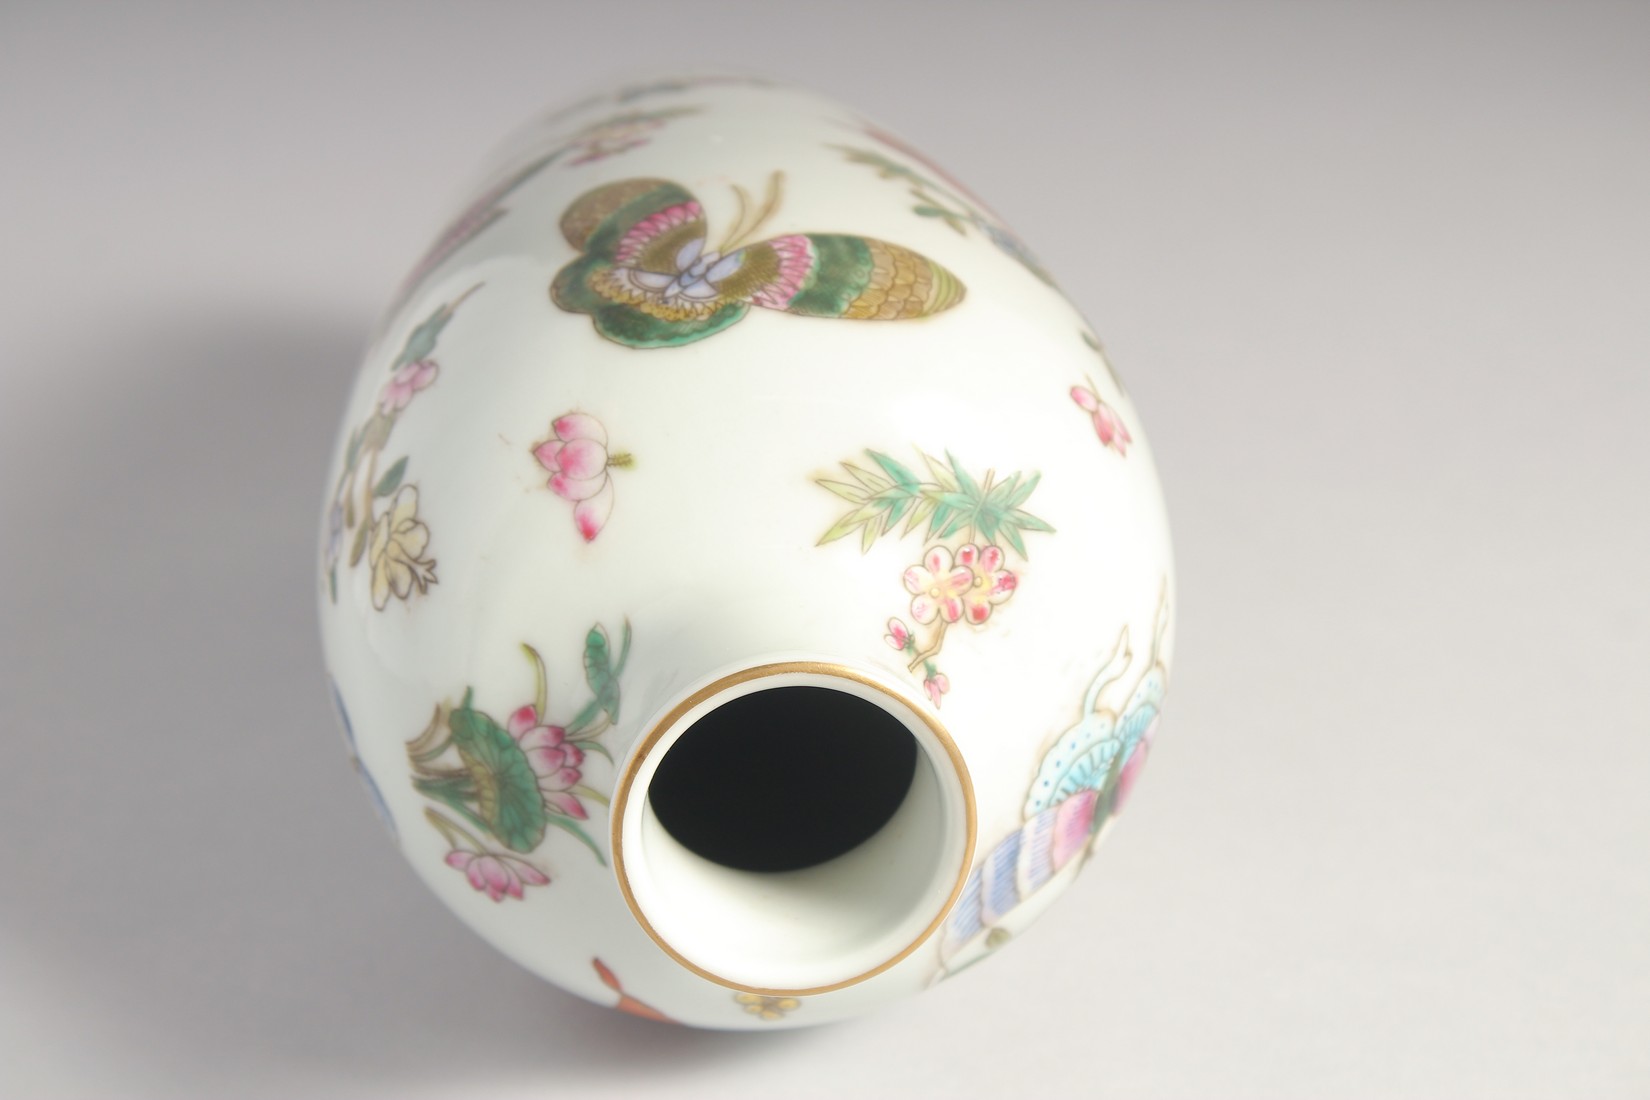 A CHINESE FAMILLE ROSE PORCELAIN BUTTERFLY VASE, base with character mark in red, 25cm high. - Image 5 of 6